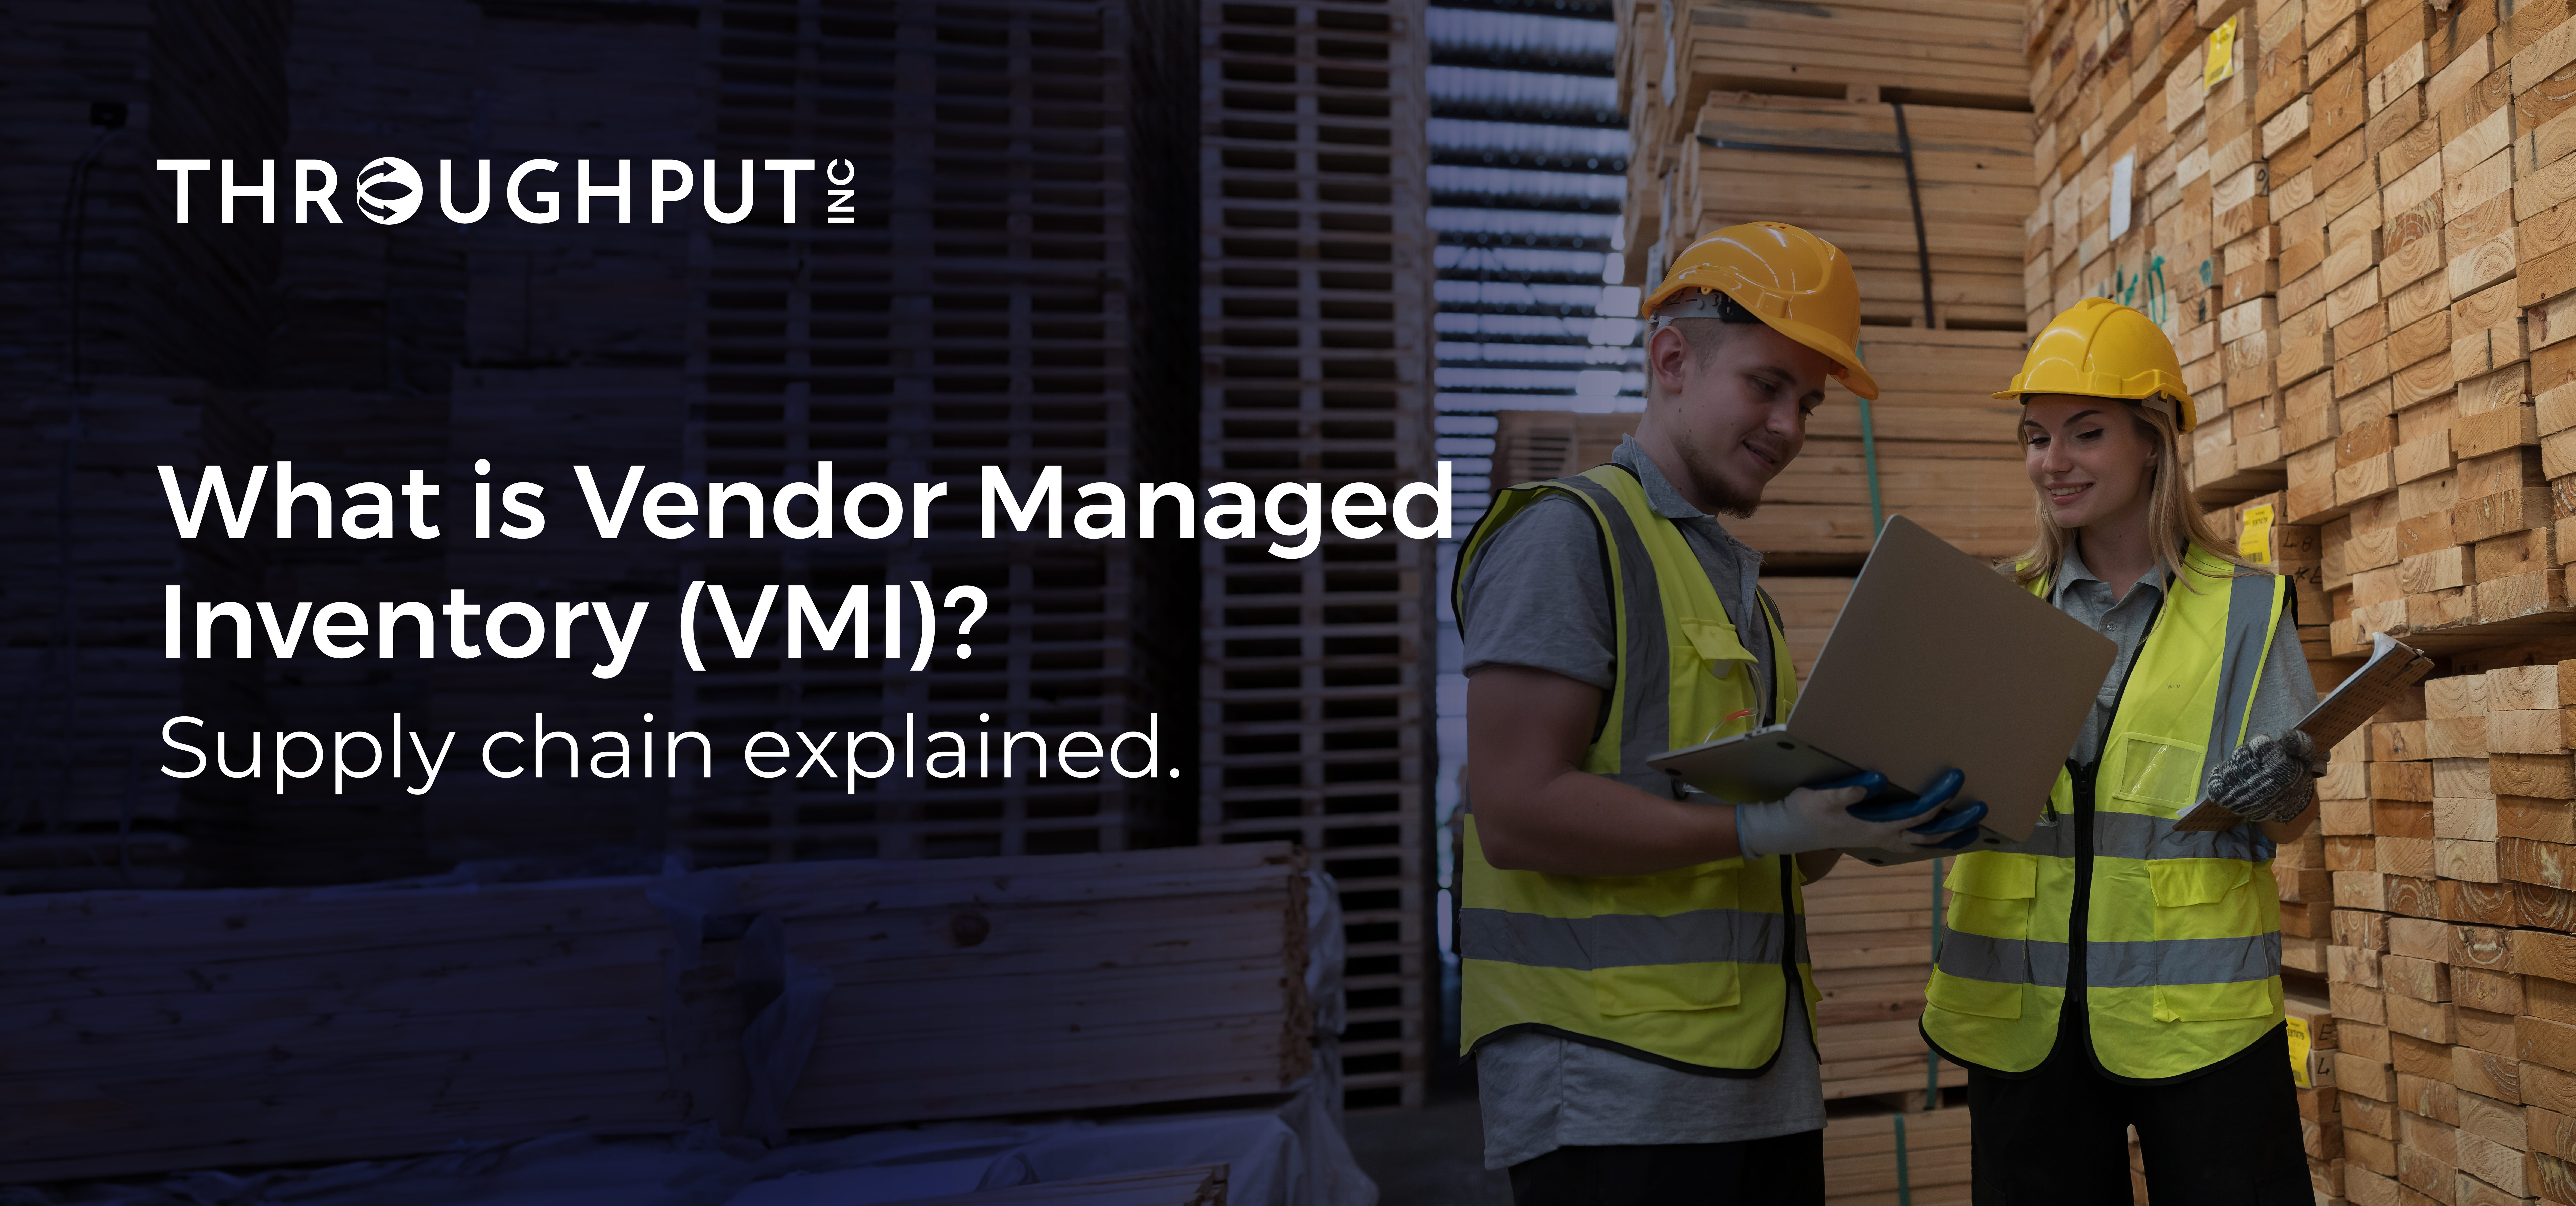 What is Vendor Managed Inventory (VMI)?